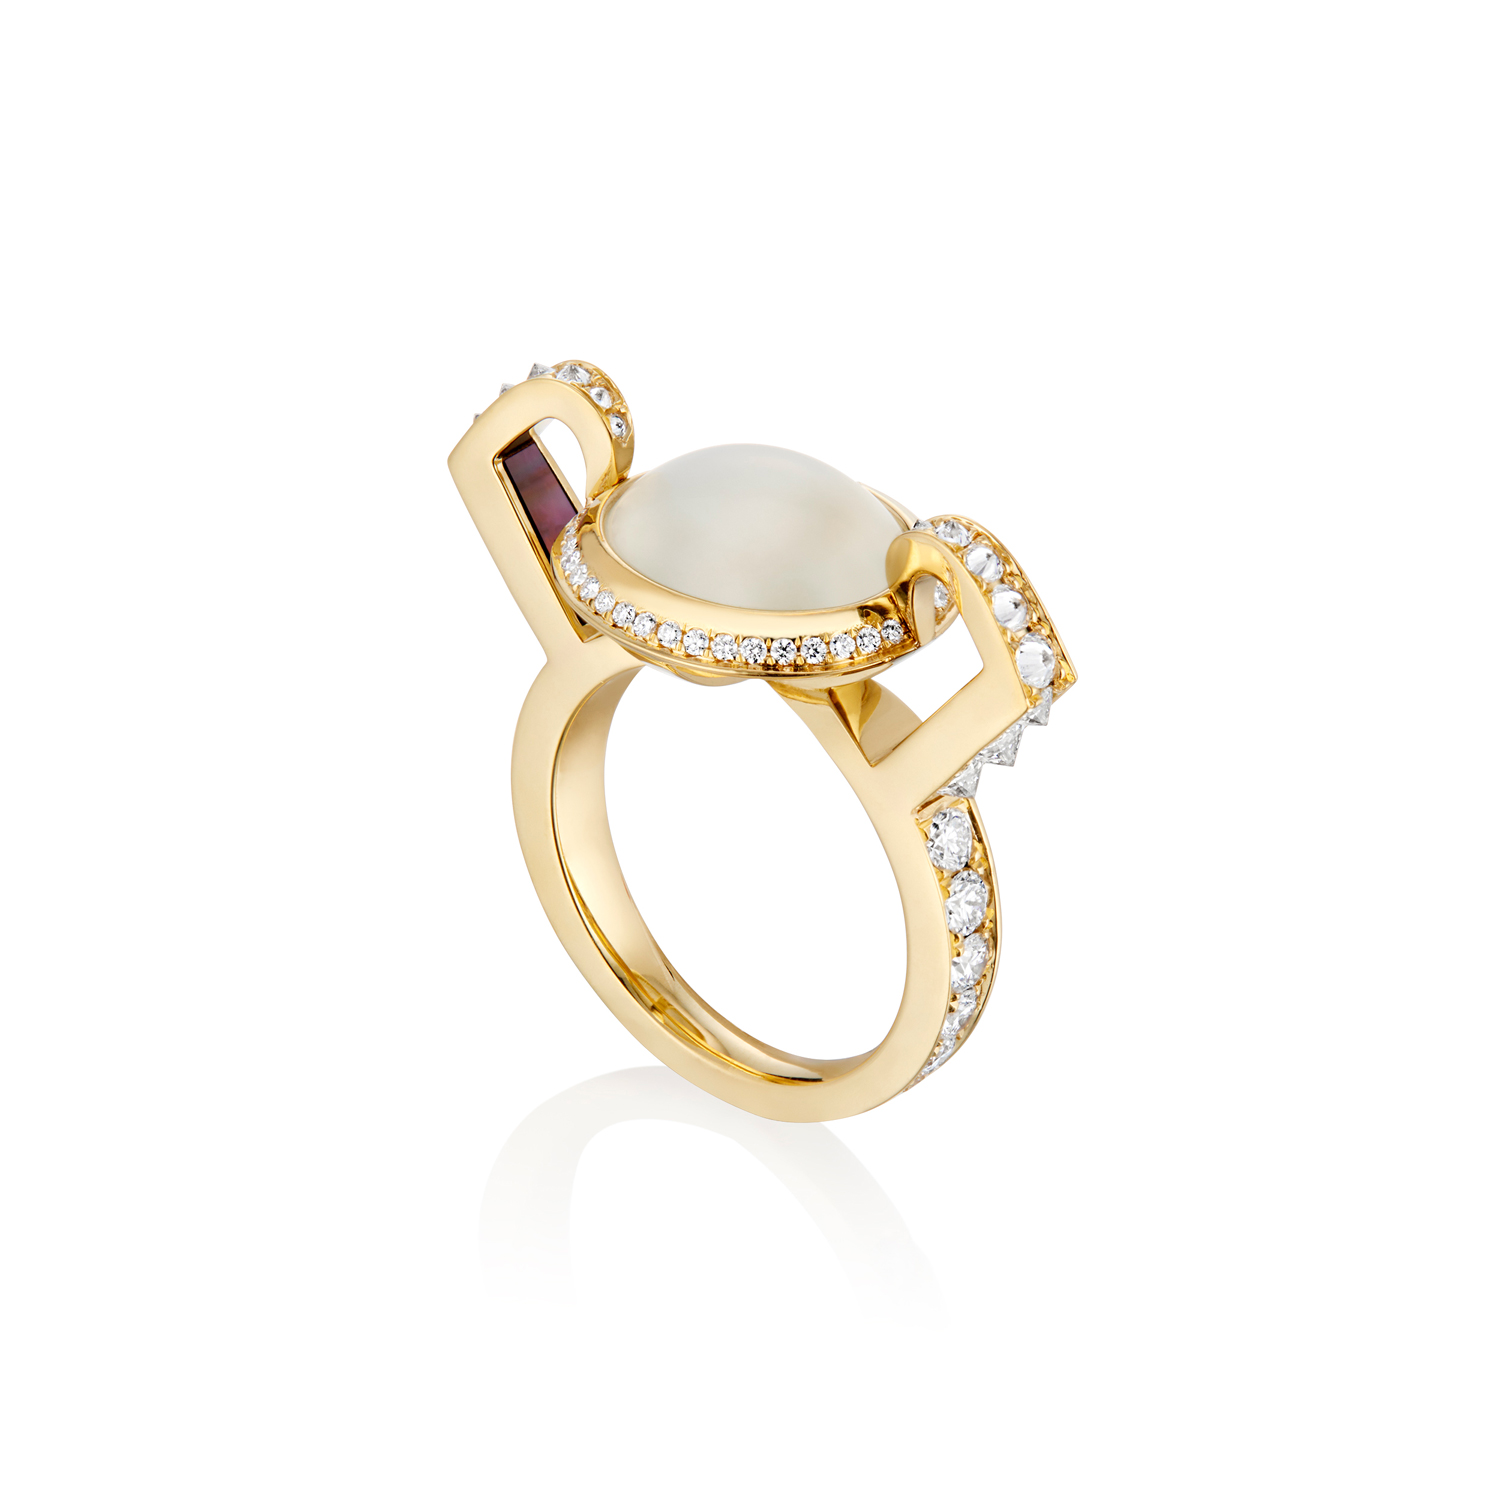 This is another detailed 3/4 view of the Renisis Reservoir Ice Ring by artist Sardwell. It is crafted in 18k yellow gold with inverted diamonds and a translucent ice jade center. Its setting is high and dramatic.